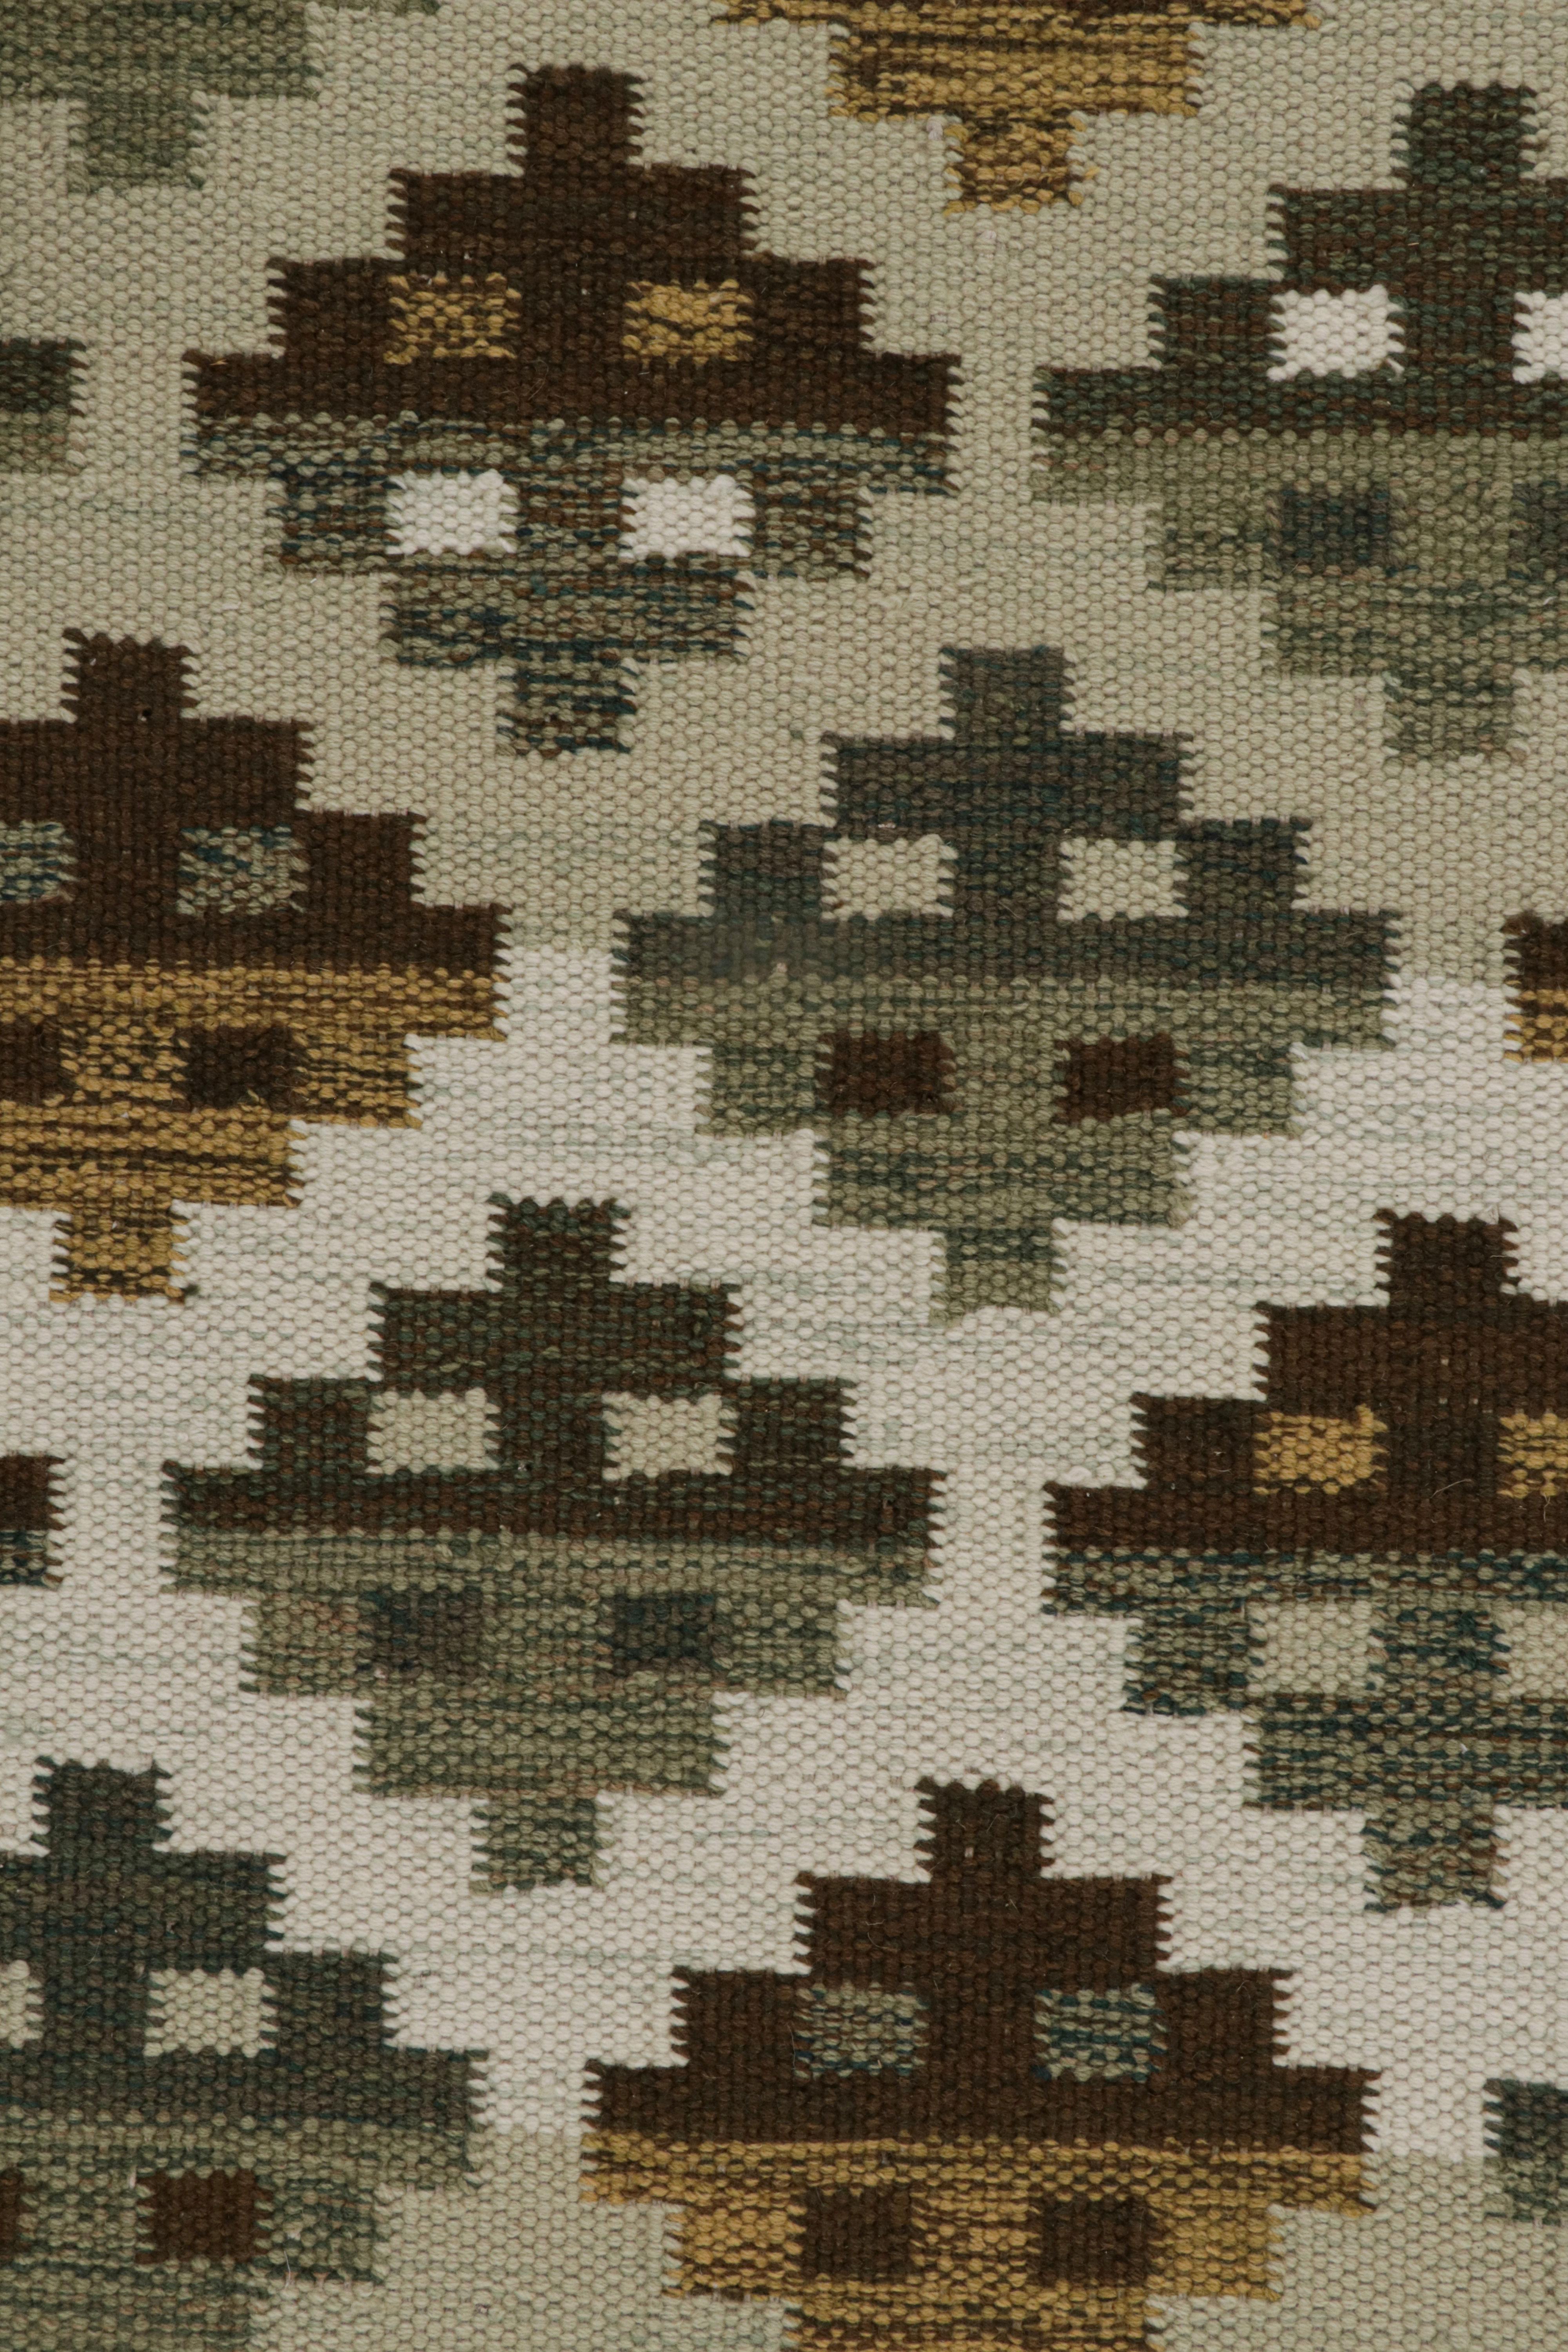 Rug & Kilim’s Scandinavian Style Kilim in Beige-Brown and Green Patterns In New Condition For Sale In Long Island City, NY